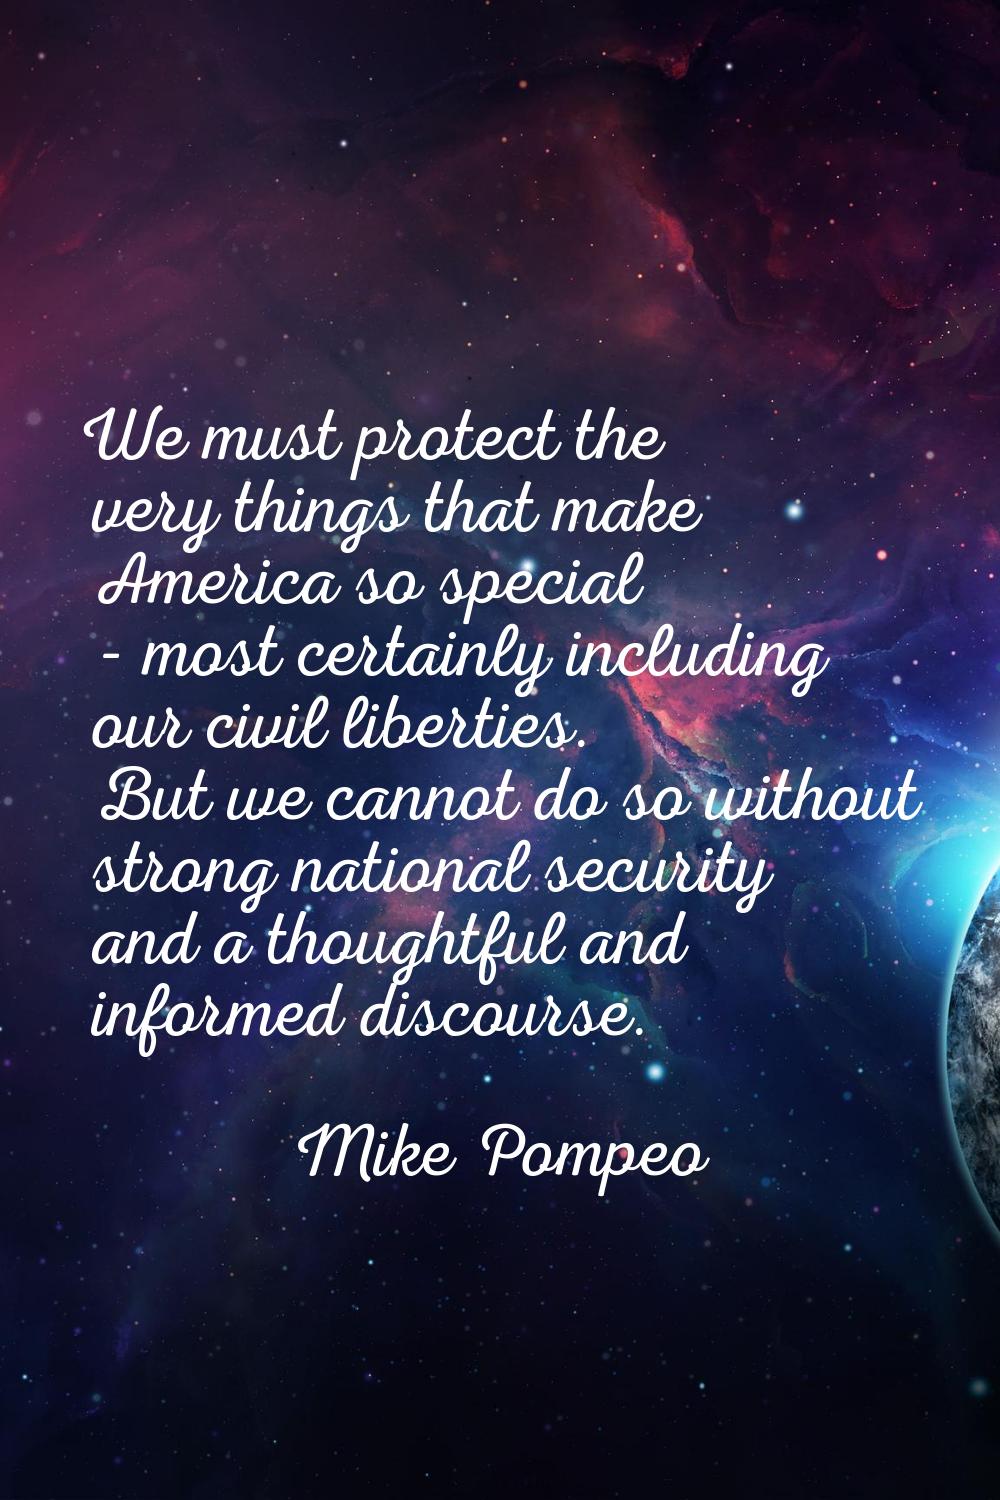 We must protect the very things that make America so special - most certainly including our civil l